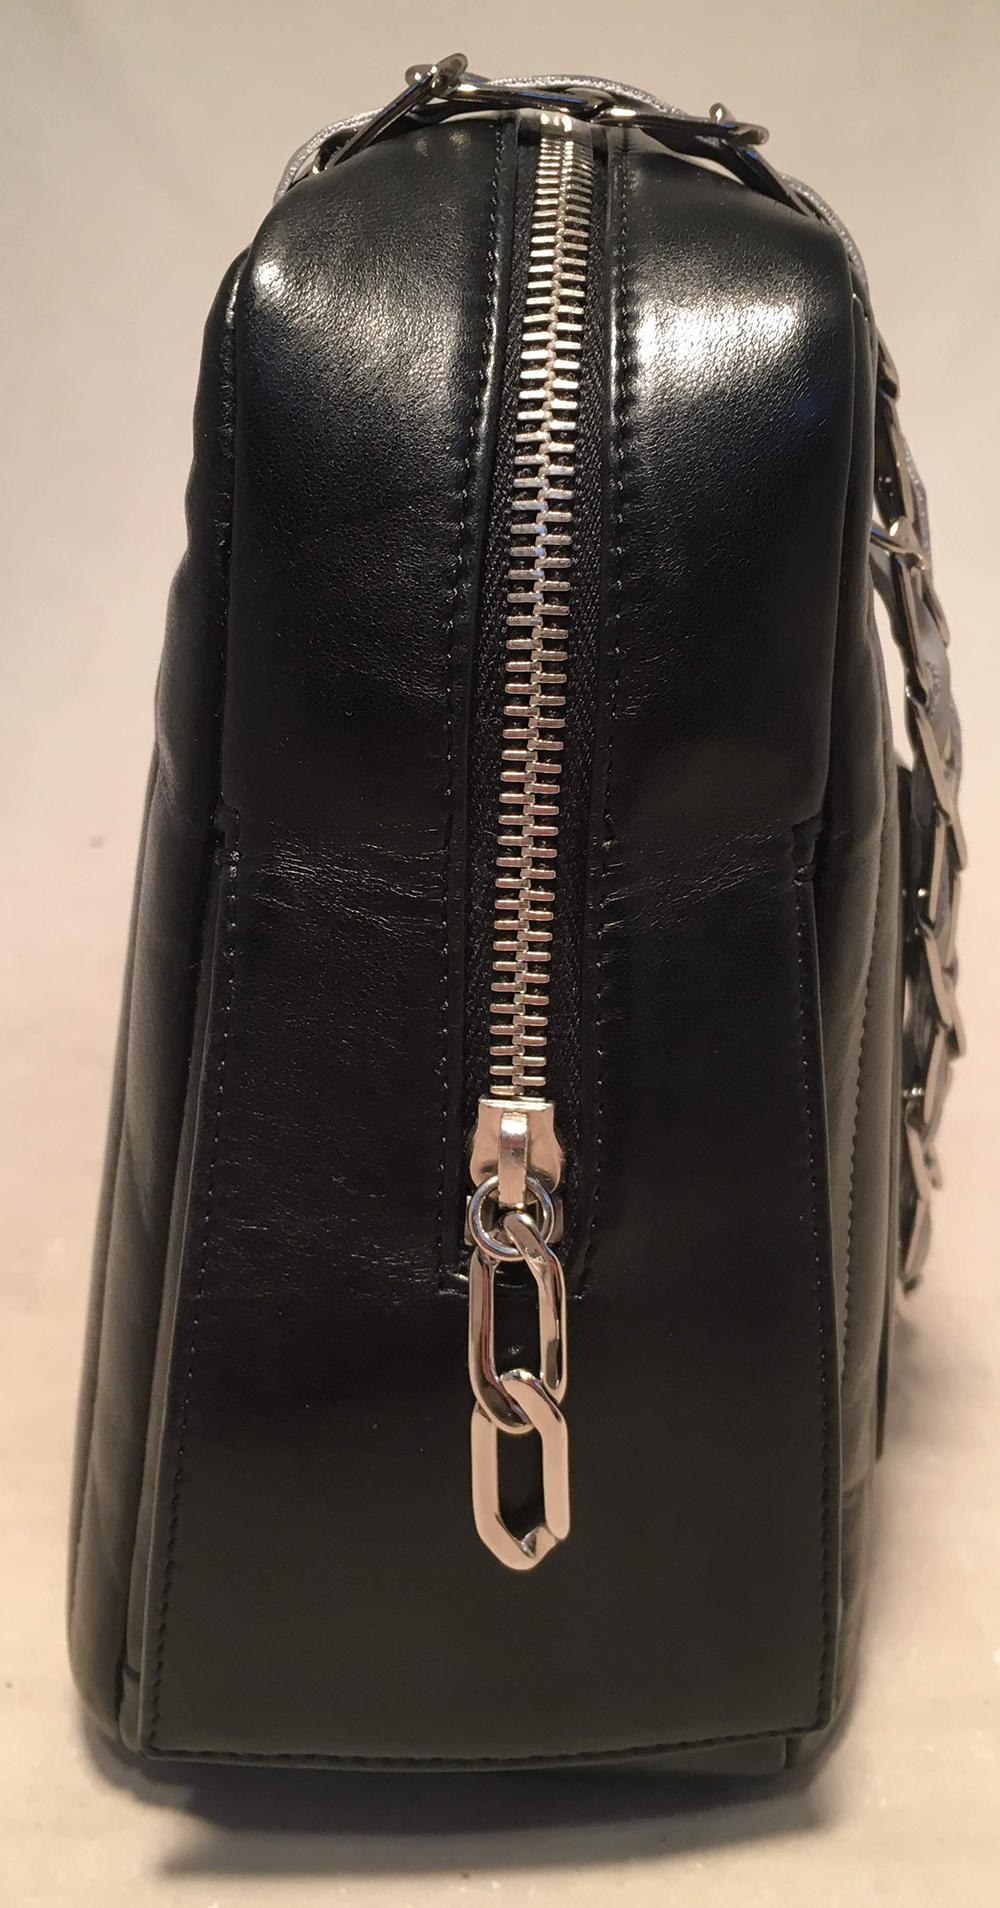 Chanel Mademoiselle Ligne Vertical Quilted Camera Bag in excellent condition. black vertical stripe quilted lambskin exterior trimmed with silver hardware and a unique woven chain and reflective ribbon shoulder strap that can be worn long or short.